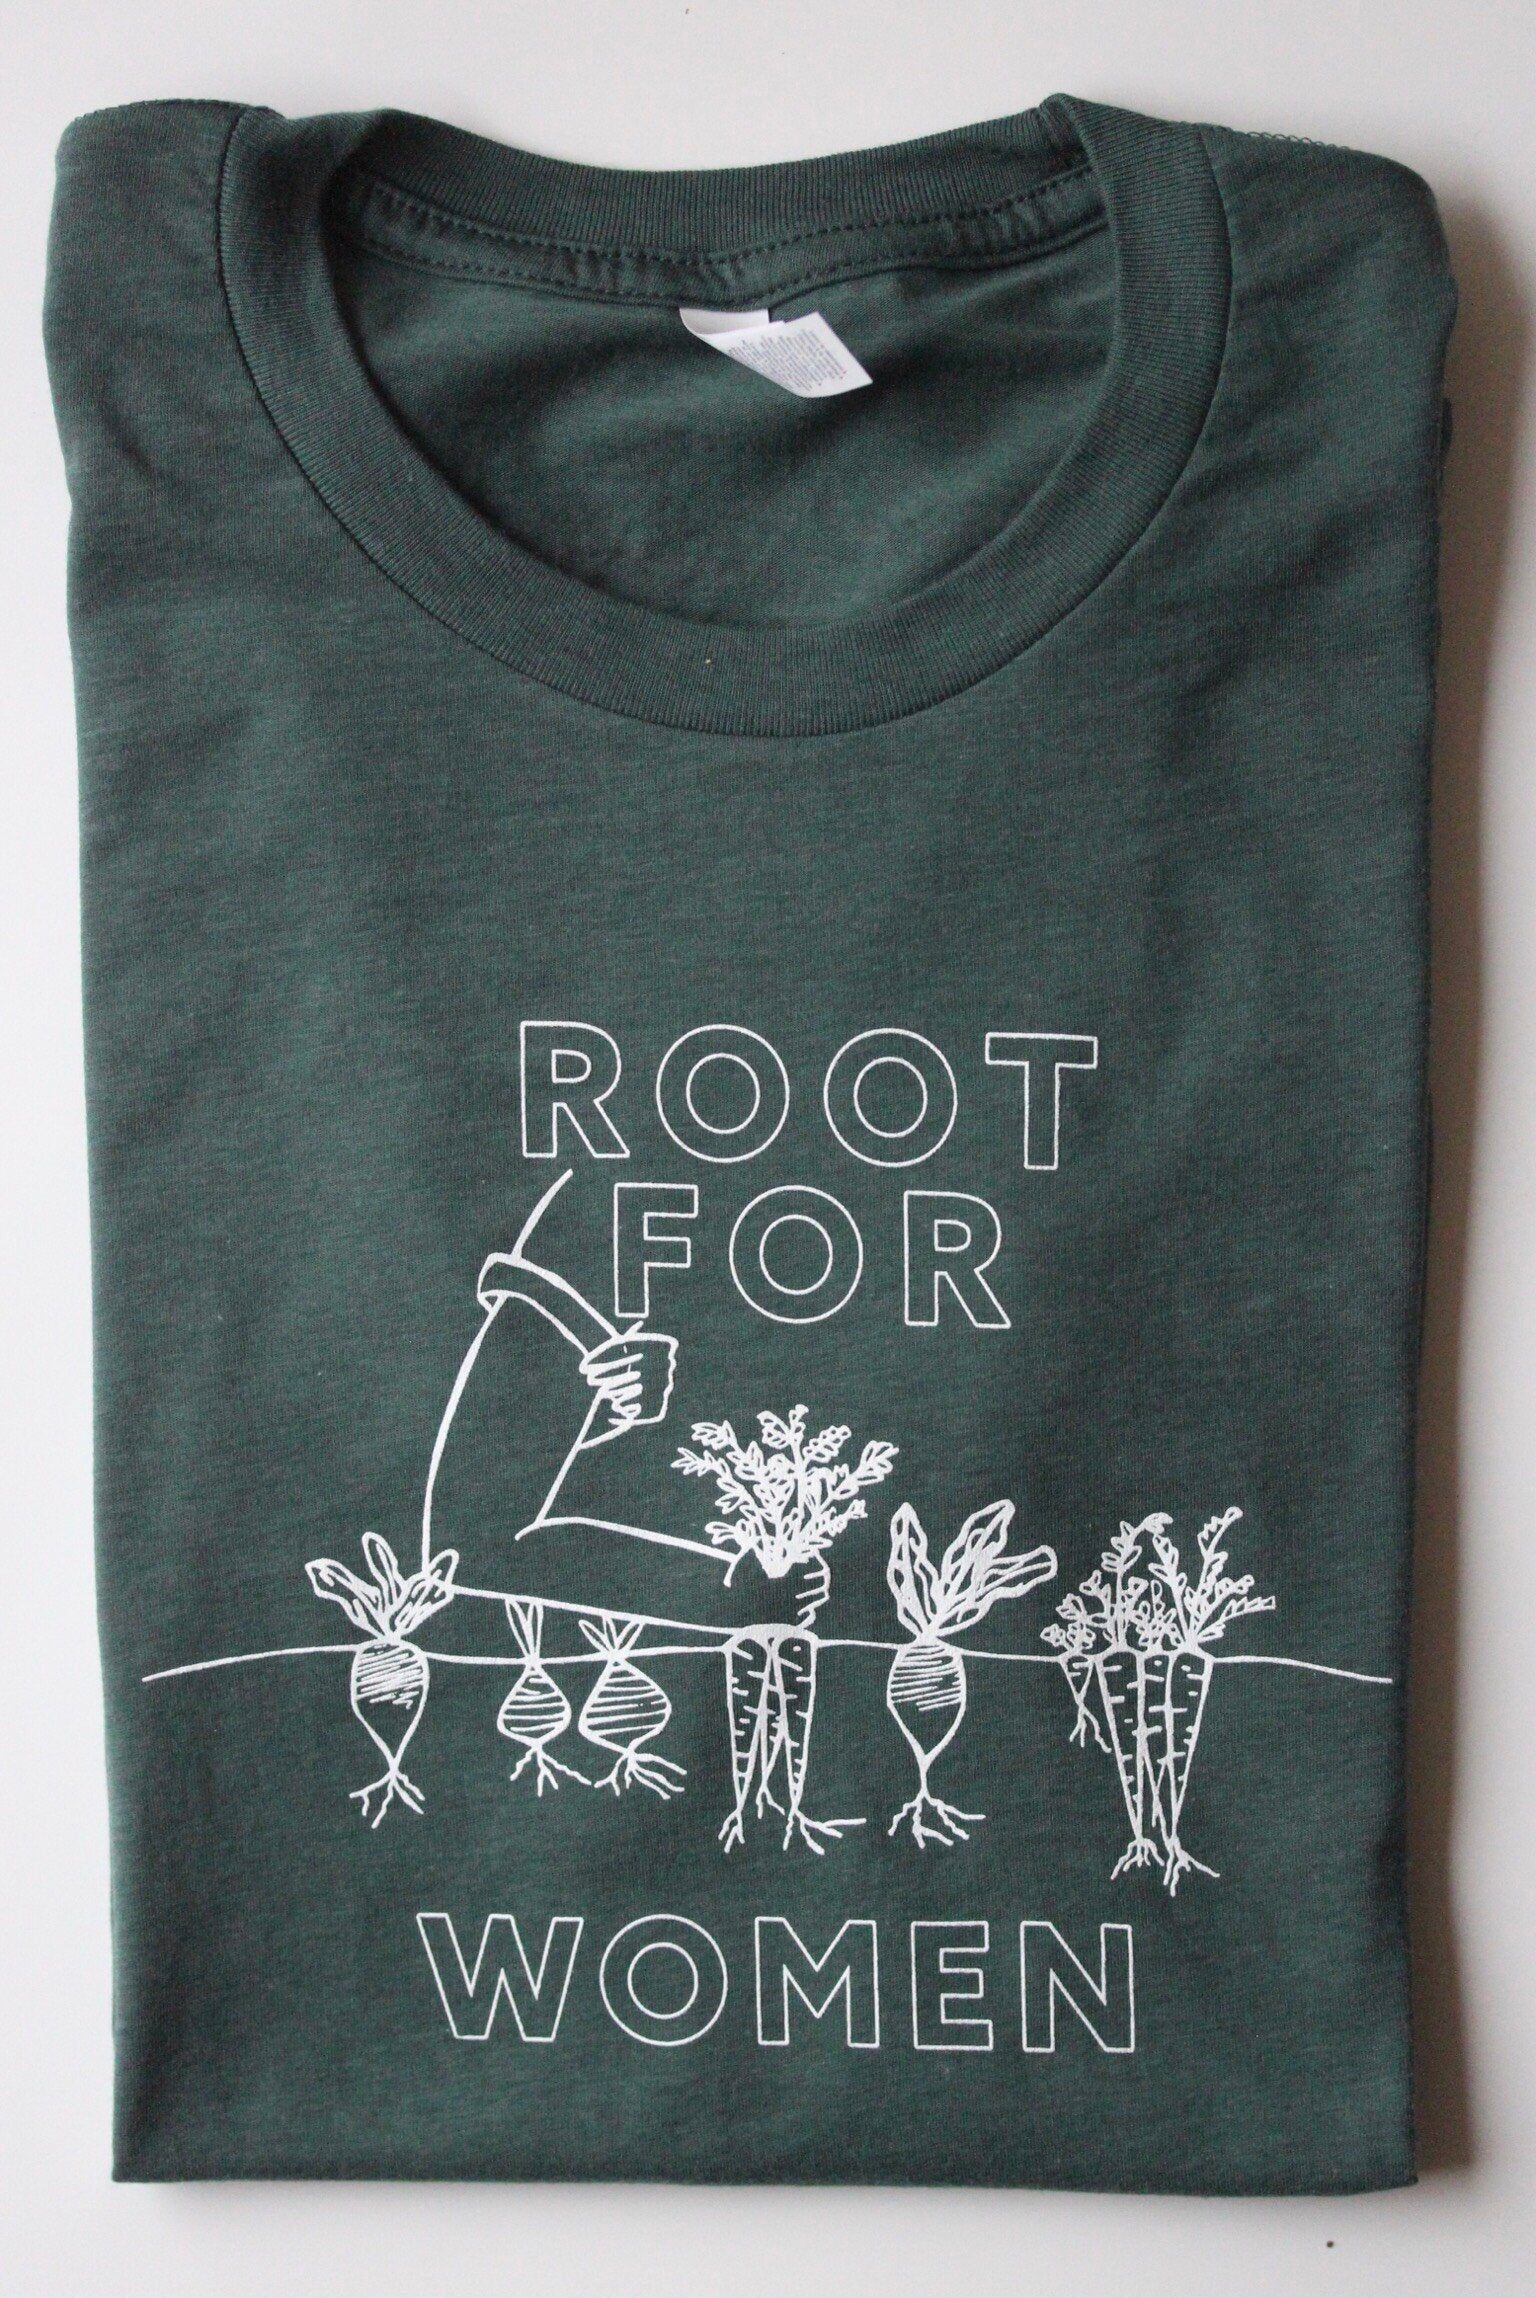 A folded green tee with white block letters reads "Root for Women"